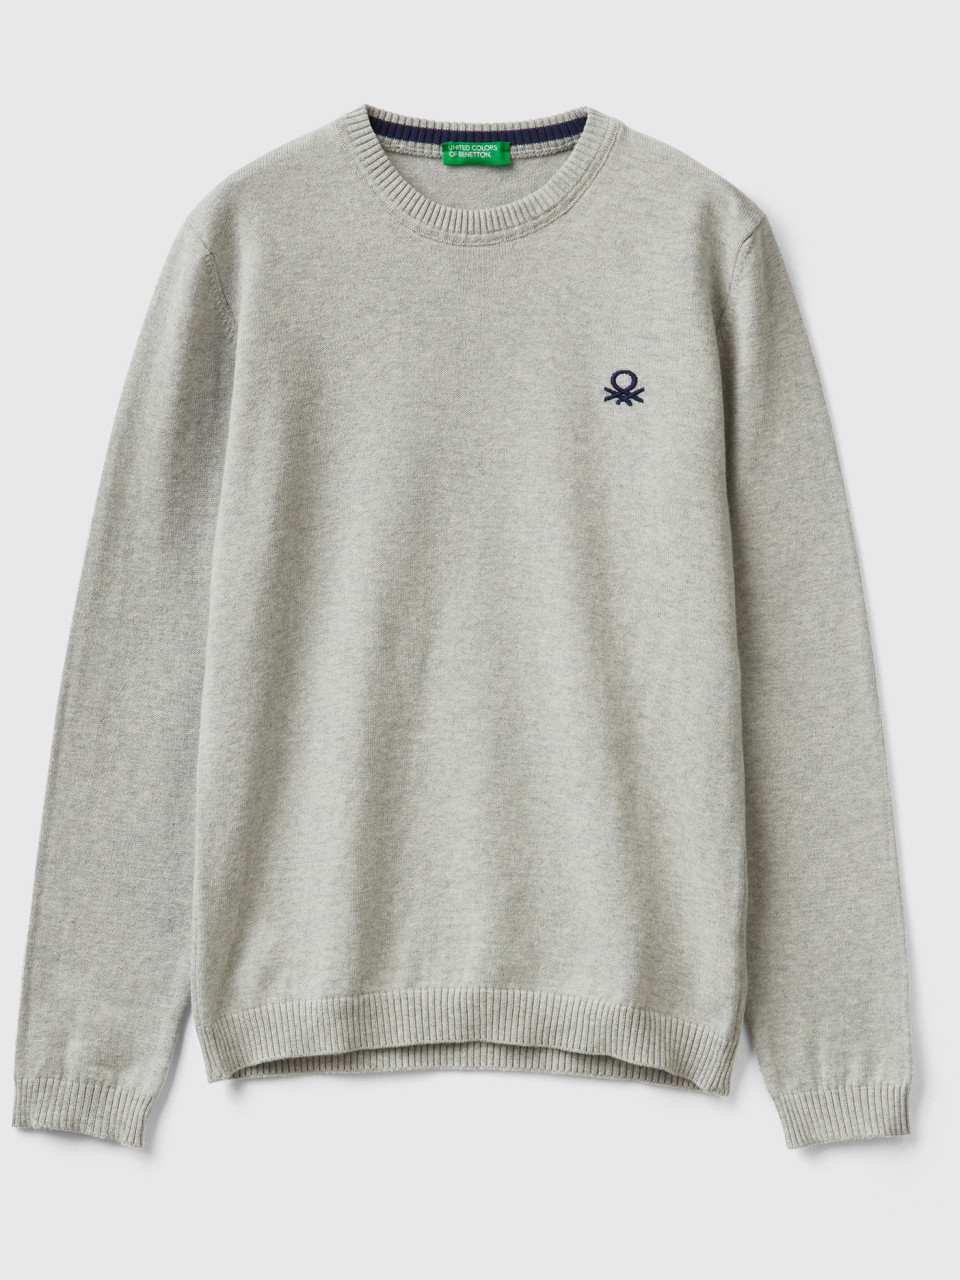 Benetton, Sweater In Pure Cotton With Logo, Light Gray, Kids